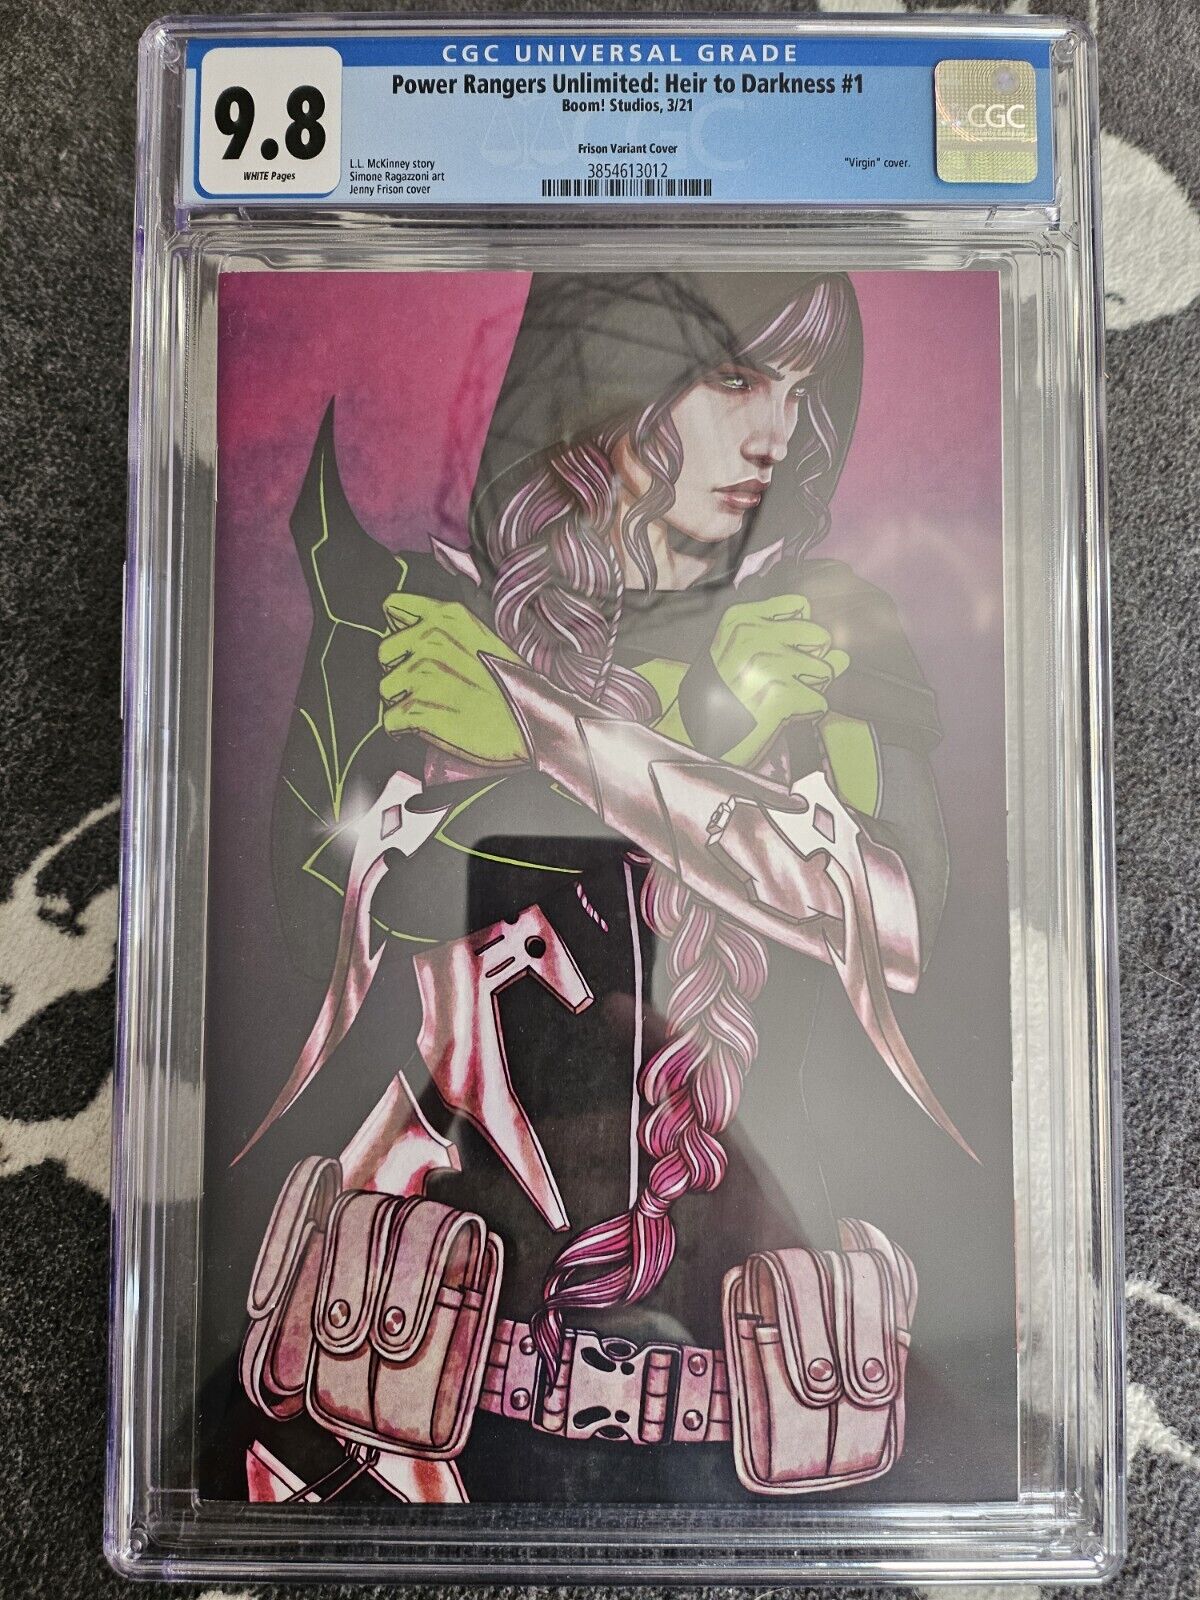 Power Rangers Unlimited: Heir To Darkness #1 🔥 CGC 9.8 🔥 1:50 Ratio 🔥 Frison